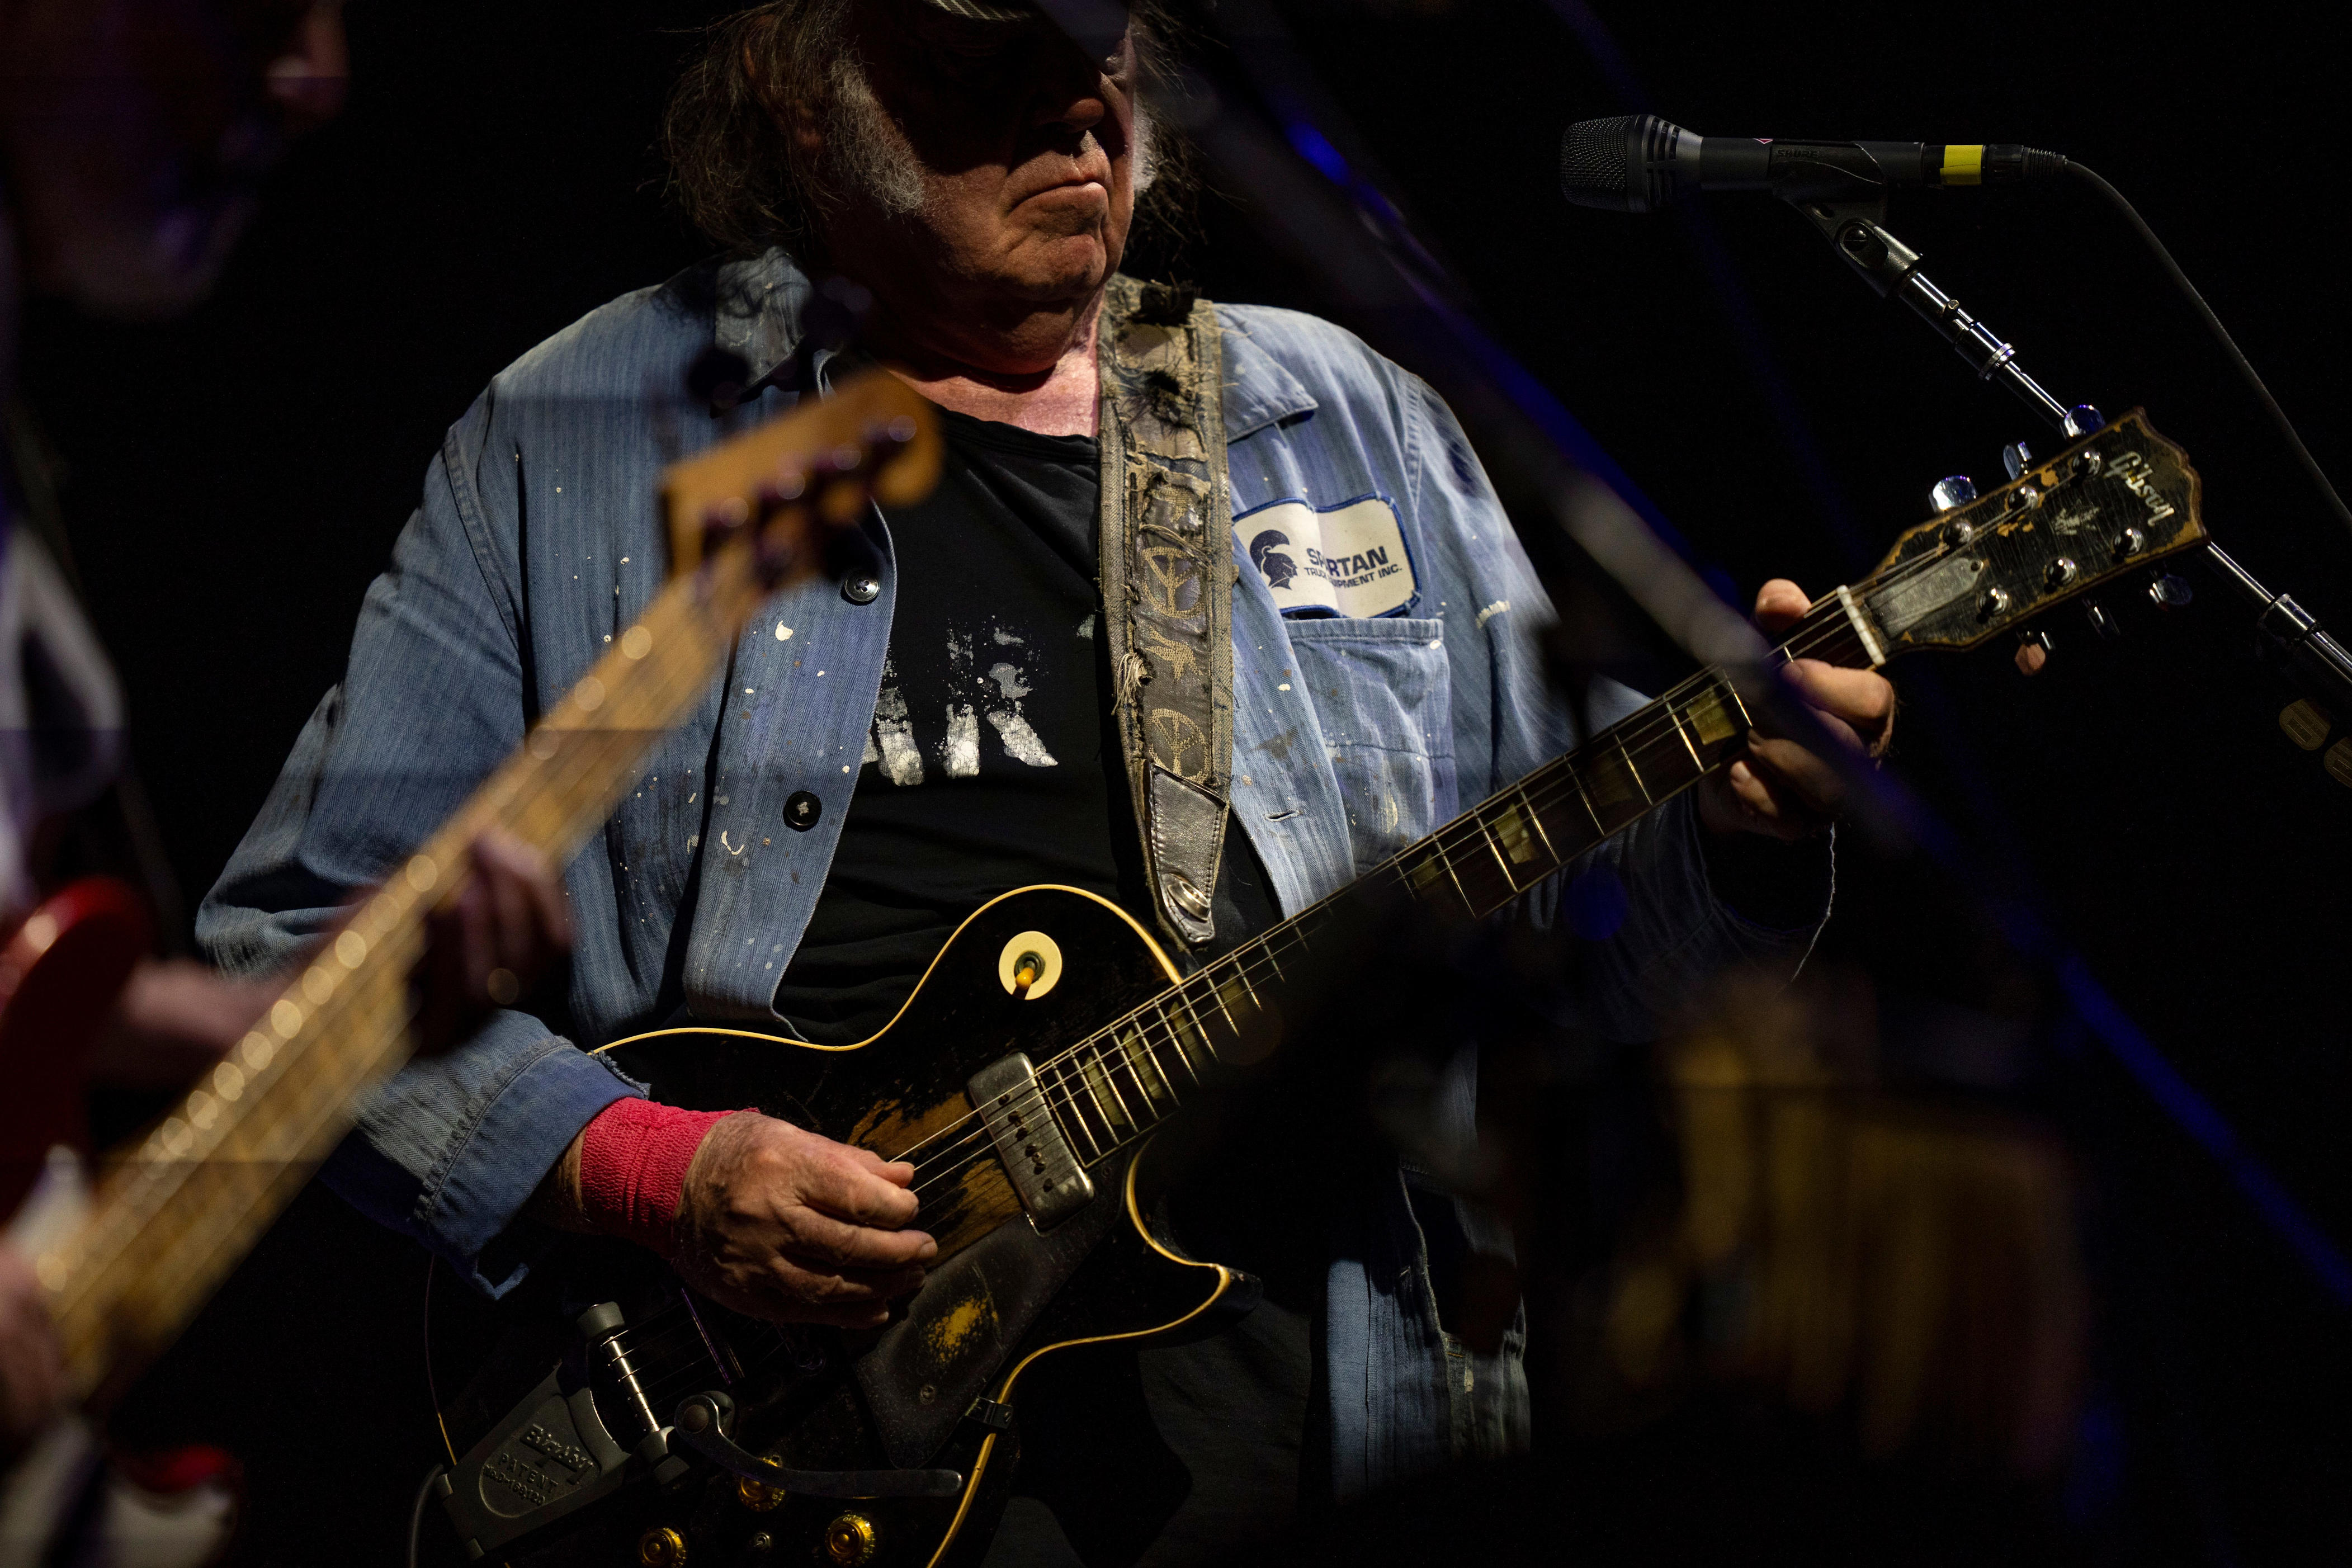 neil young reunites with crazy horse after a decade, performs double encore